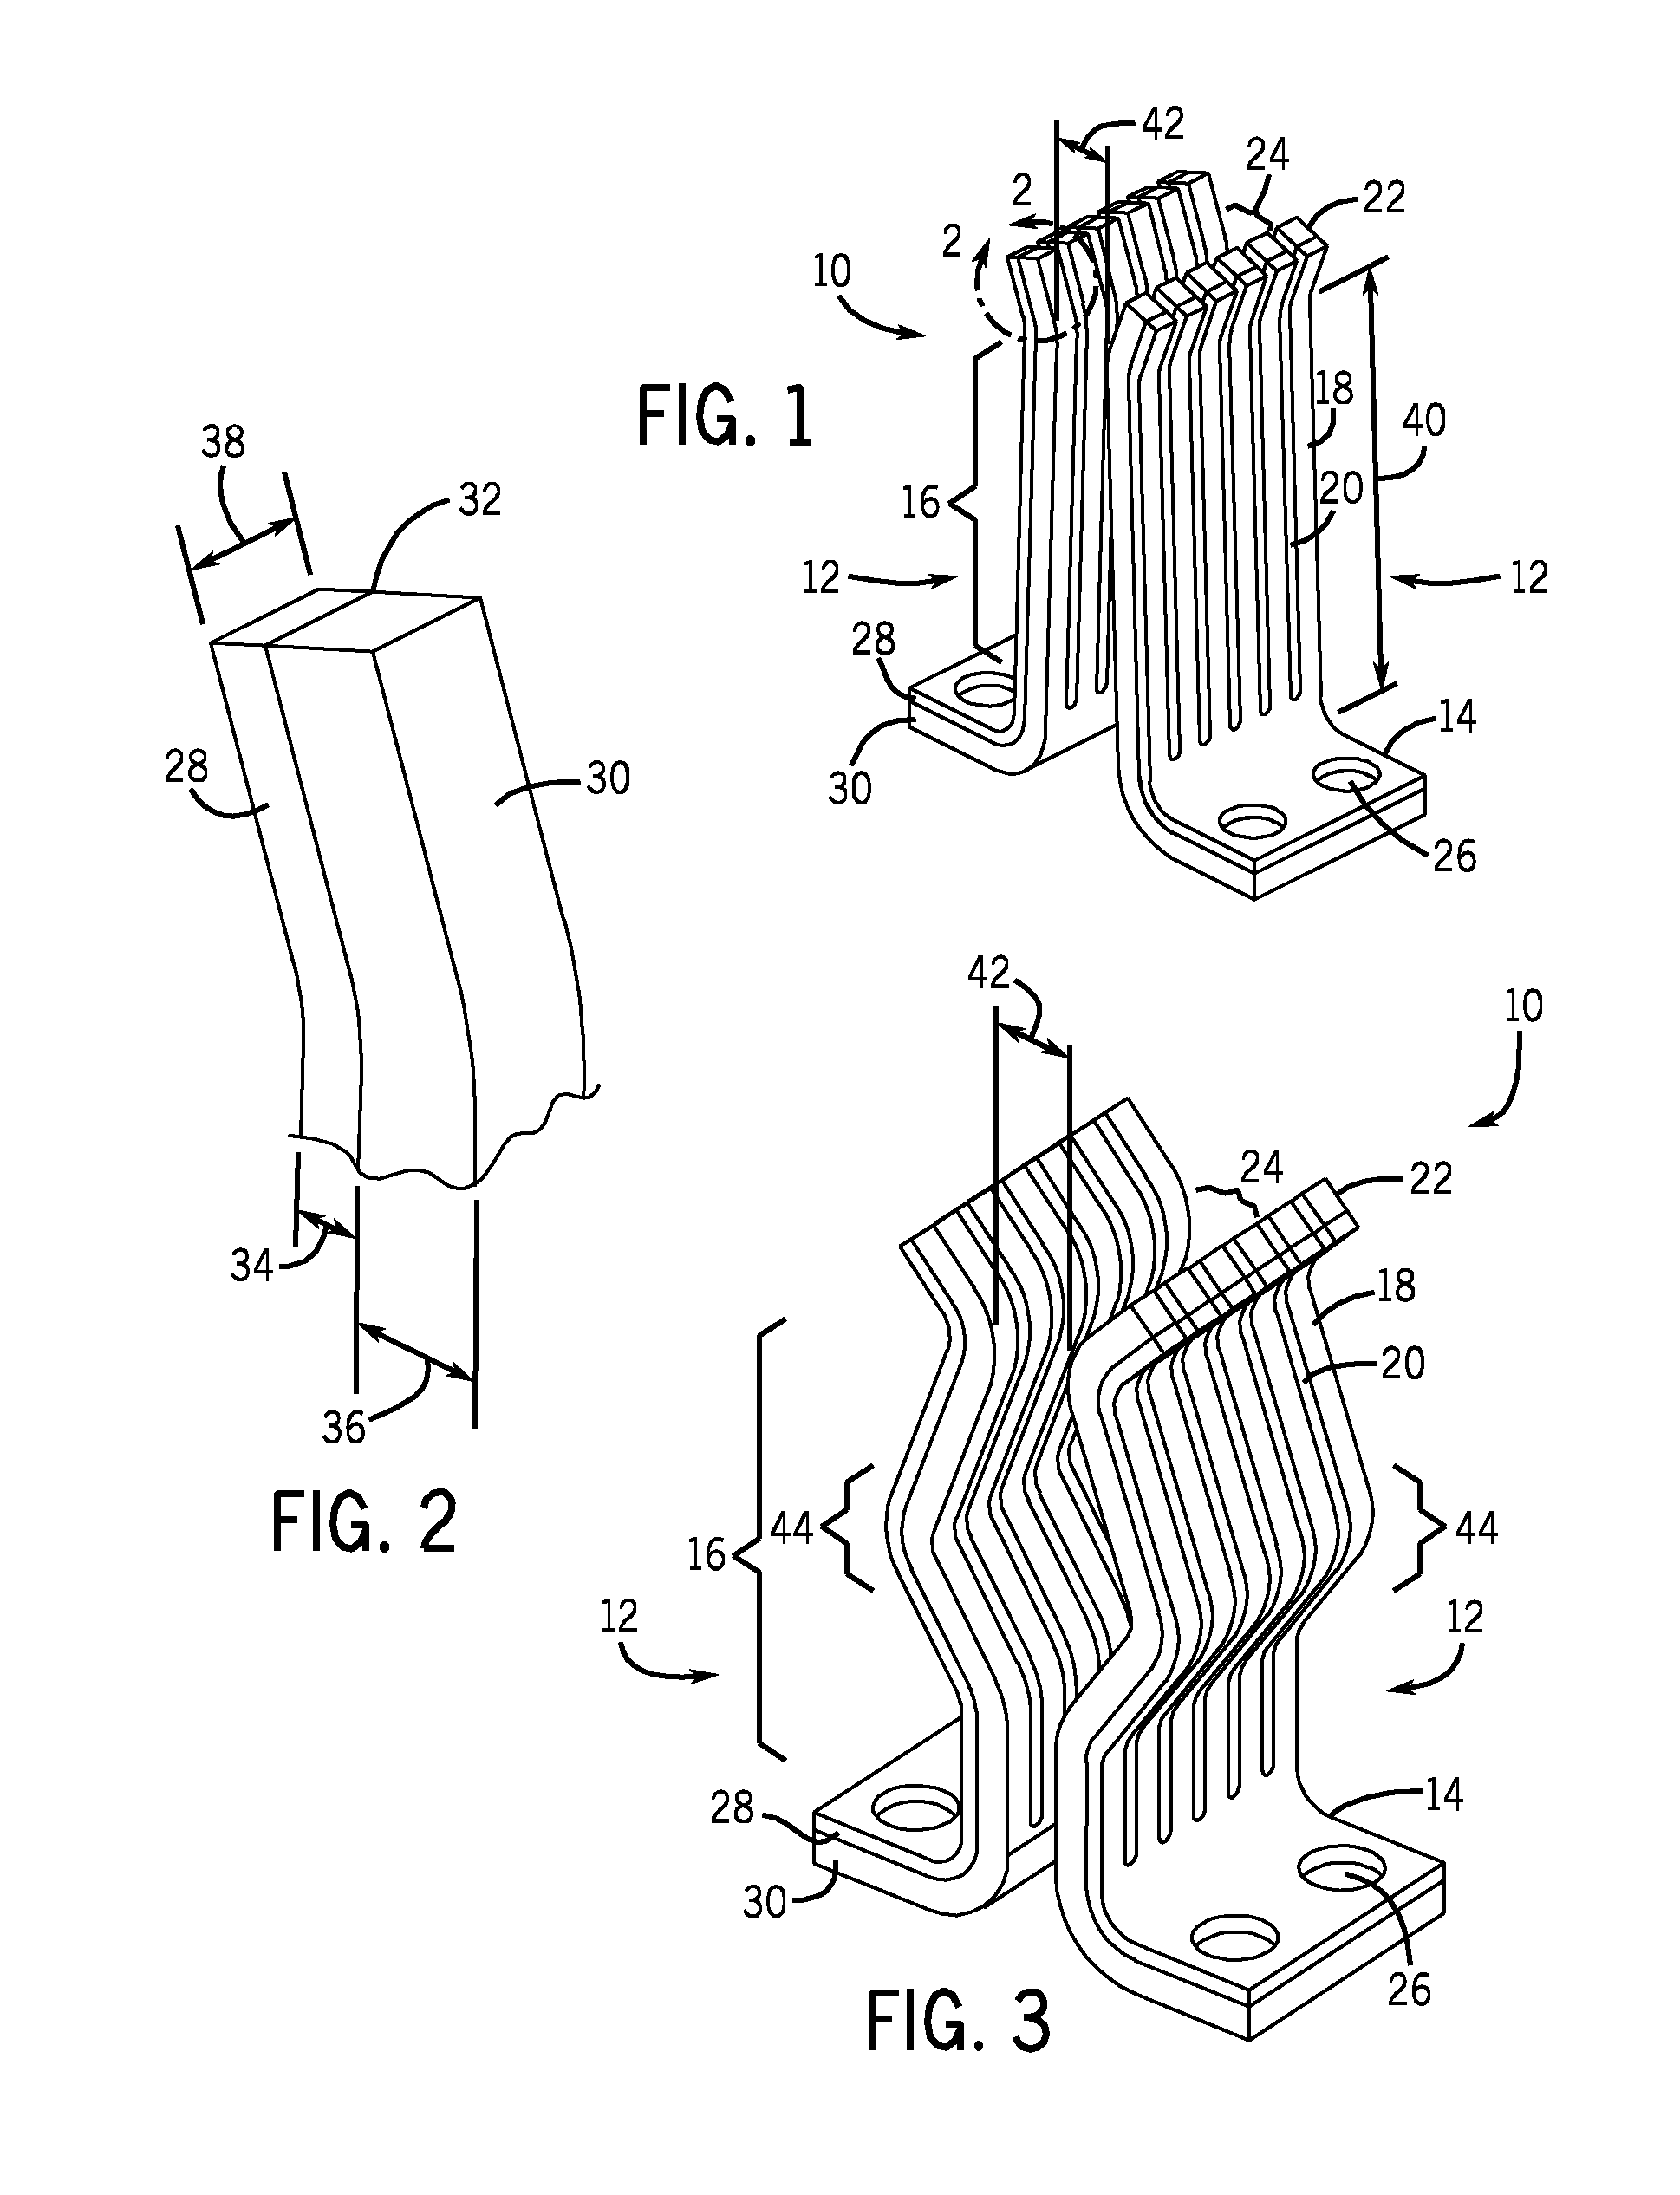 Electrical power stab system and method for making same